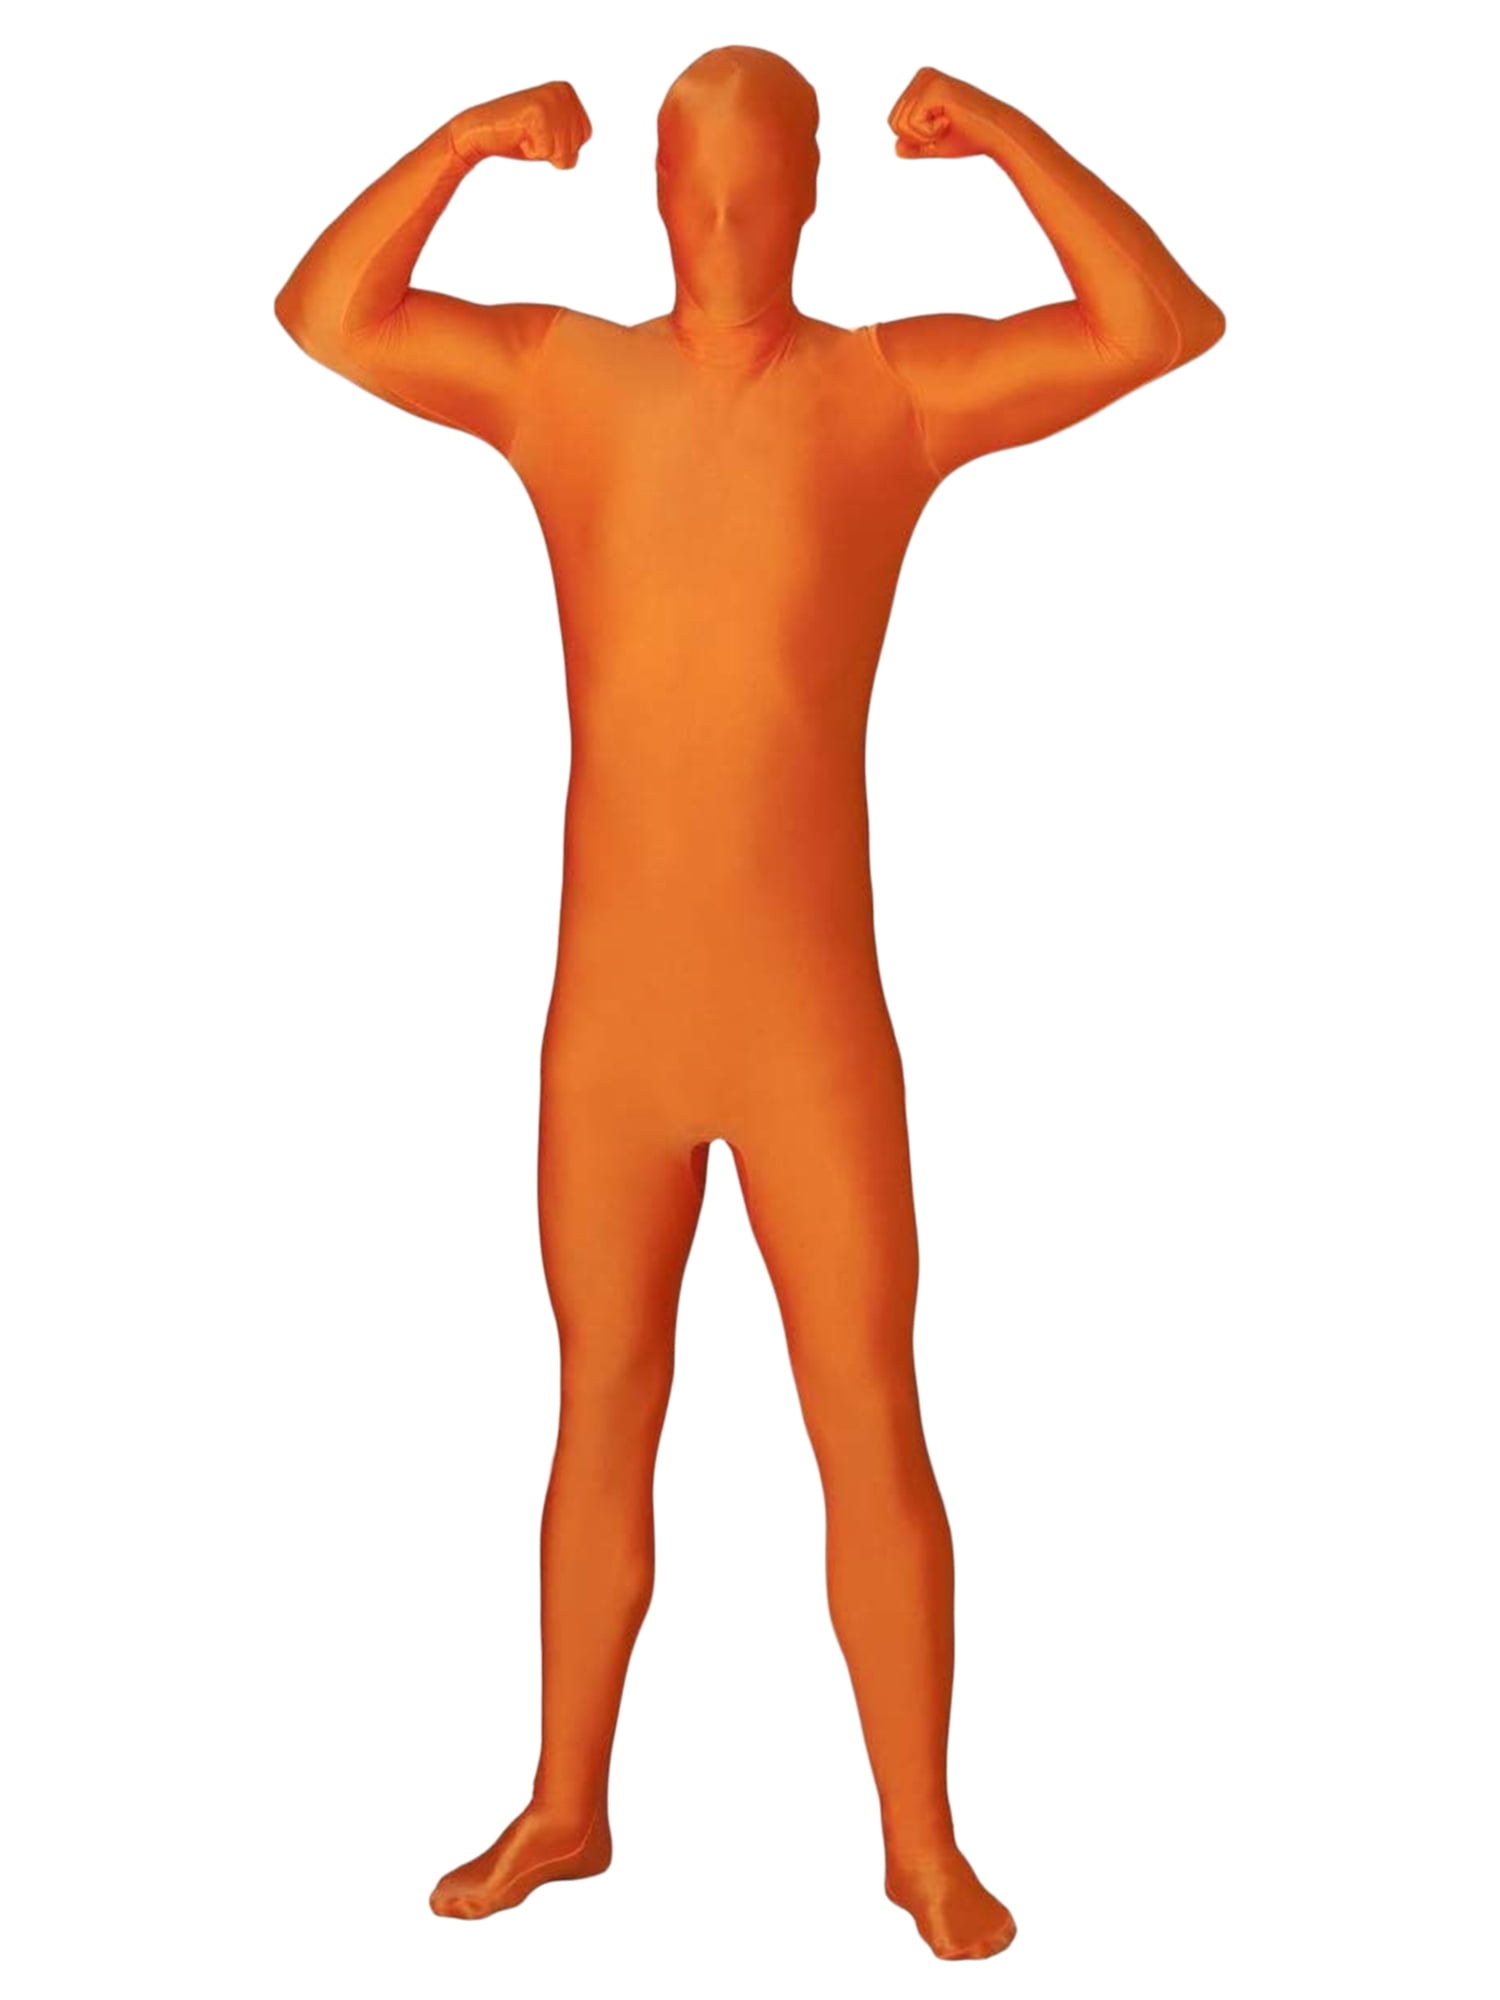 JYYYBF Halloween Full Bodysuit Adult Kids Invisibility Jumpsuit Spandex  Stretch Costume Chromakey Disappearing Body Suit Orange XL